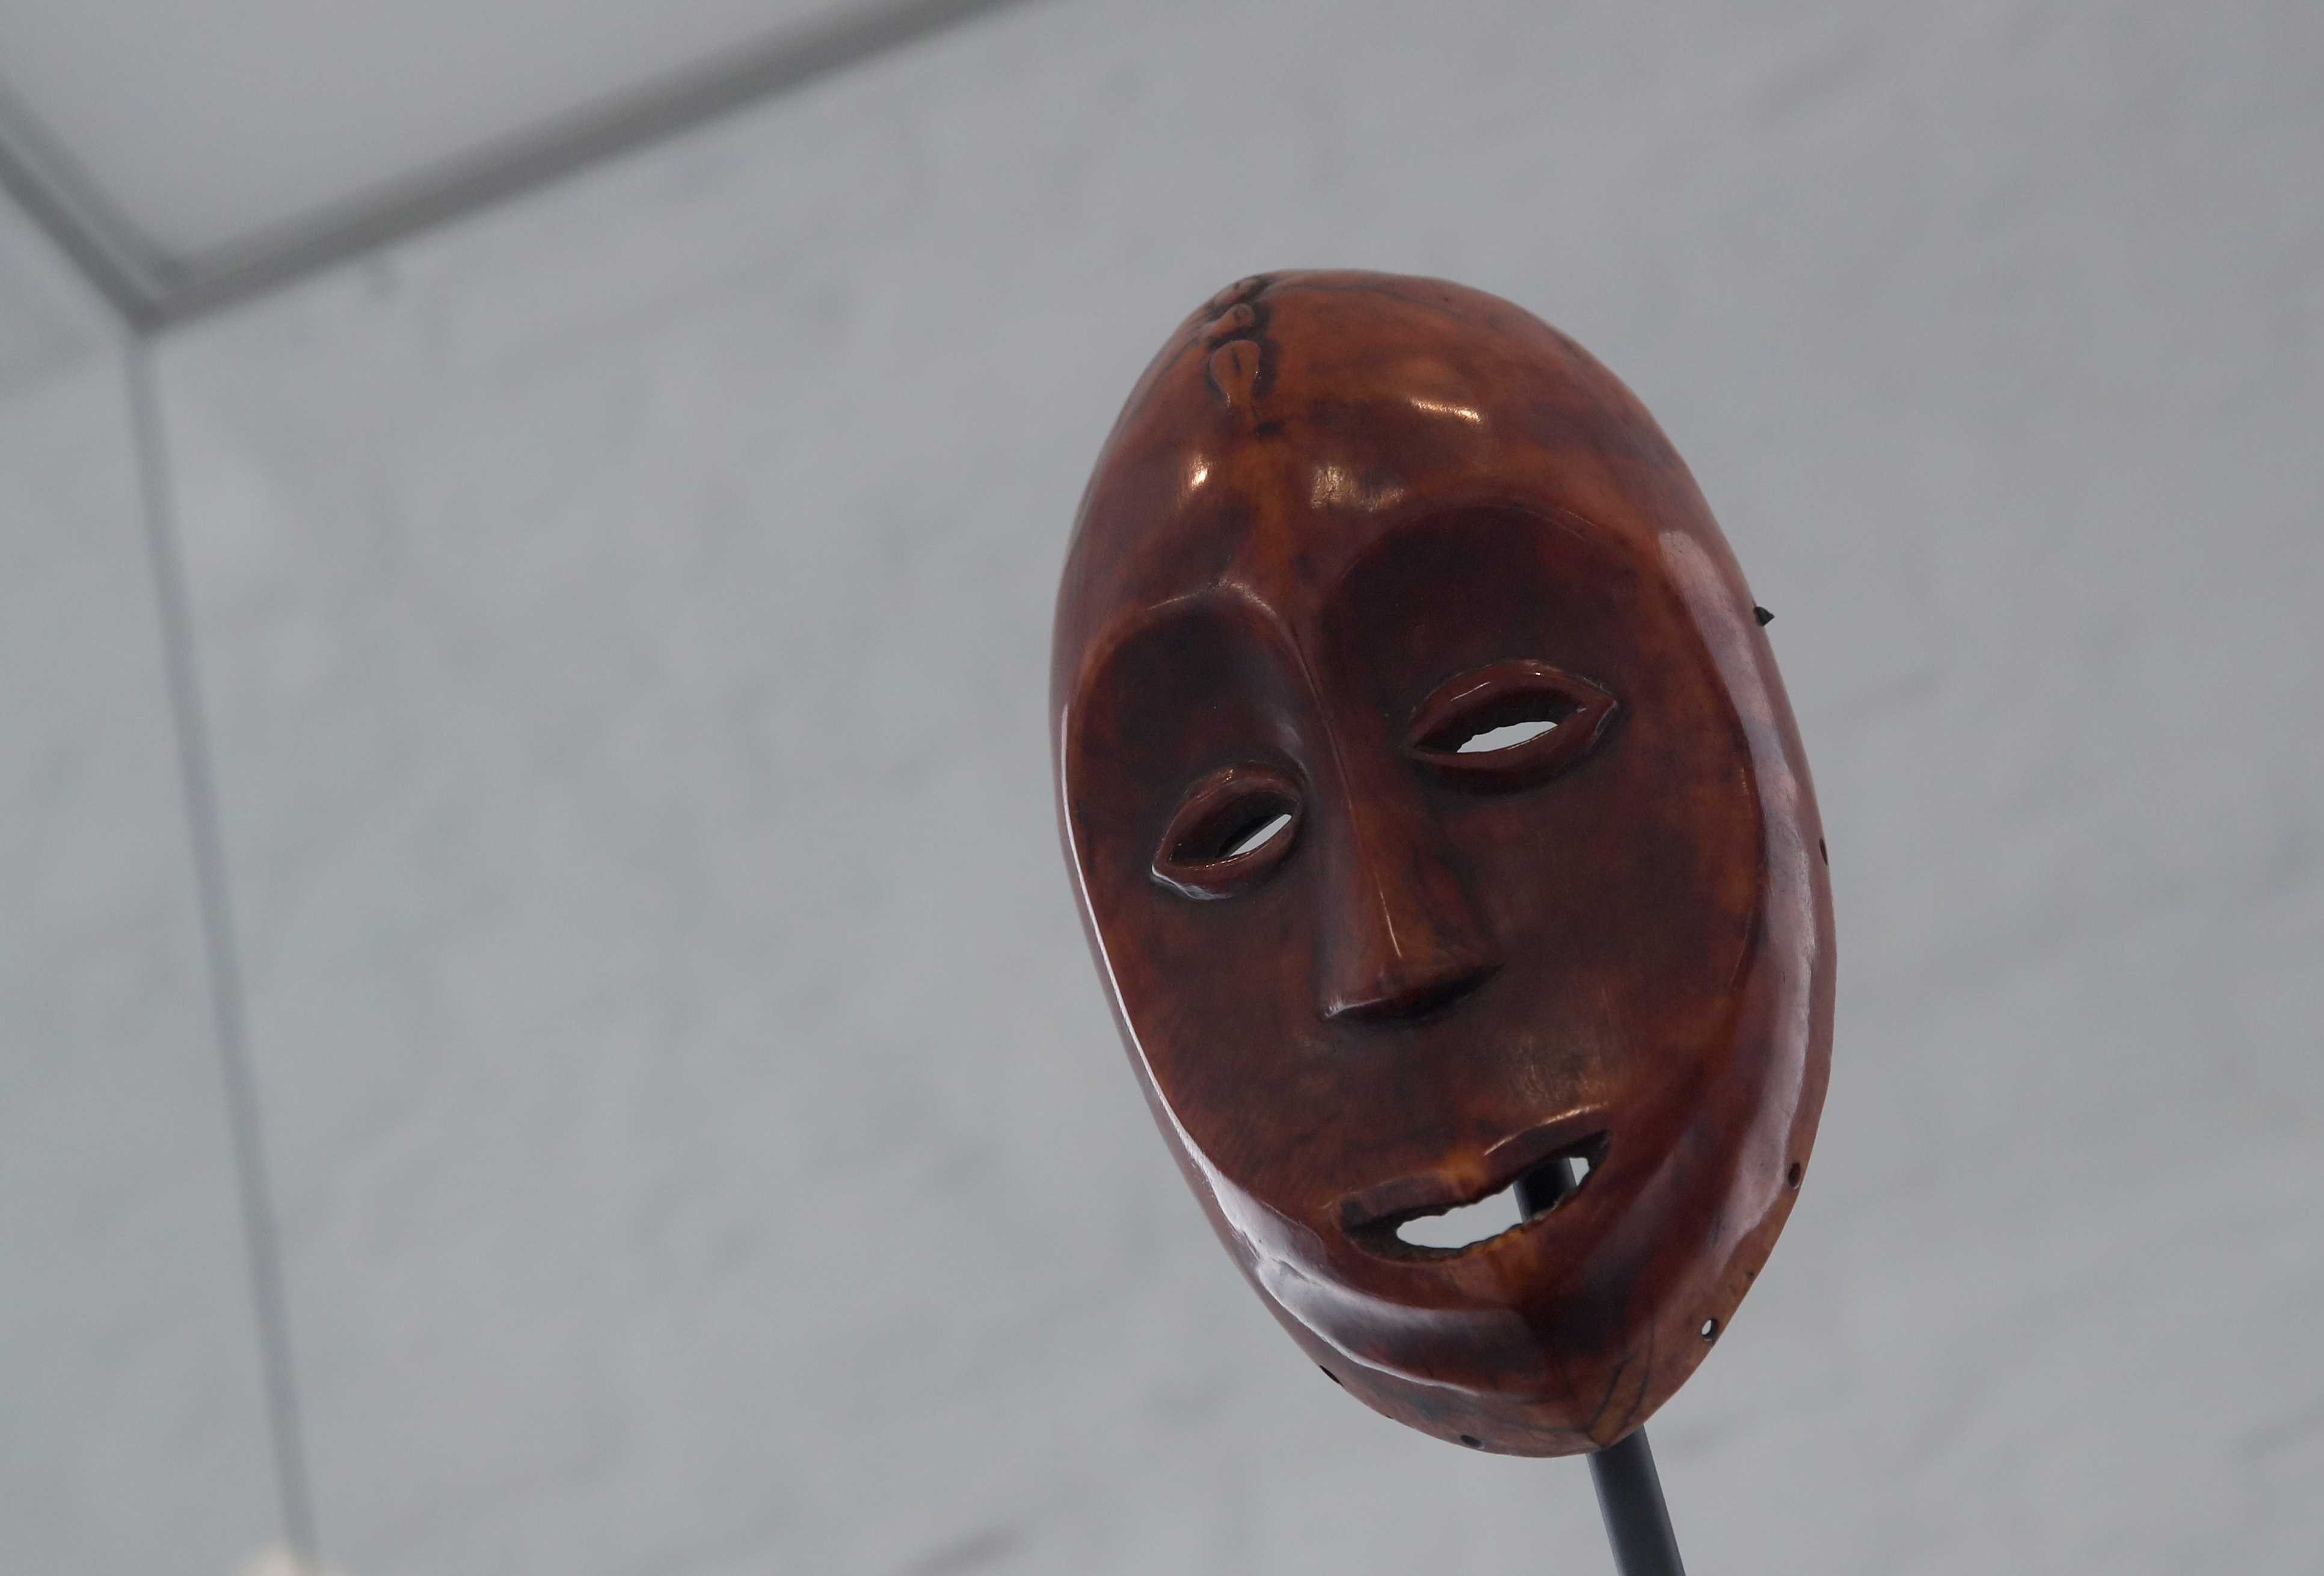 An ivory mask dated to the 19th century is pictured at the Royal Museum for Central Africa (RMCA) as the Belgian government has announced plans to return pieces of art looted from Congo during colonial rule, in Tervuren, Belgium July 6, 2021.  REUTERS/Yves Herman